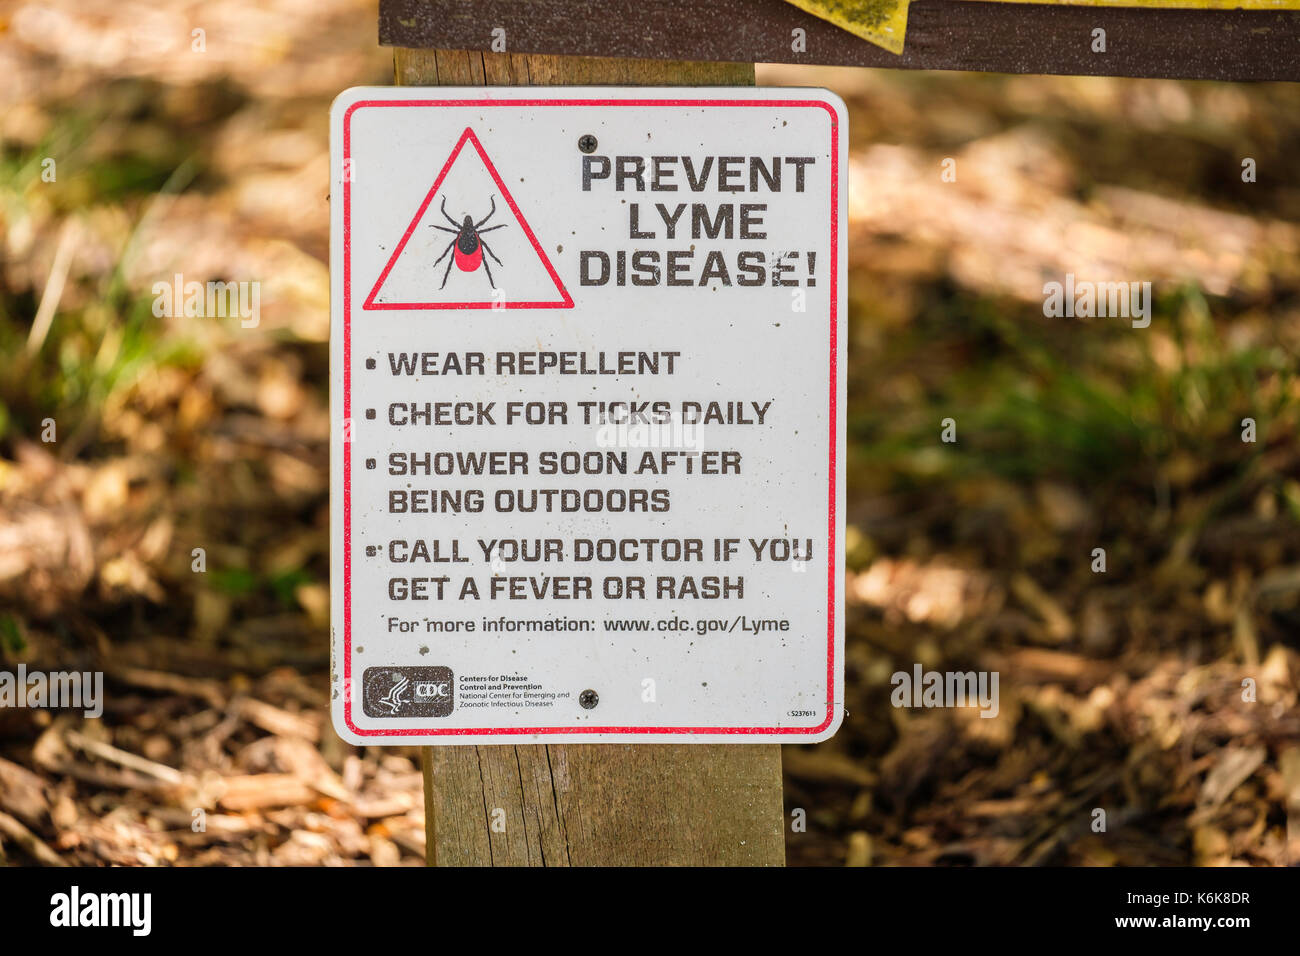 A Prevent Lyme Disease warning sign found in a nature park, Martin Park Nature Center, Memorial road, Oklahoma City, Oklahoma, USA. Stock Photo